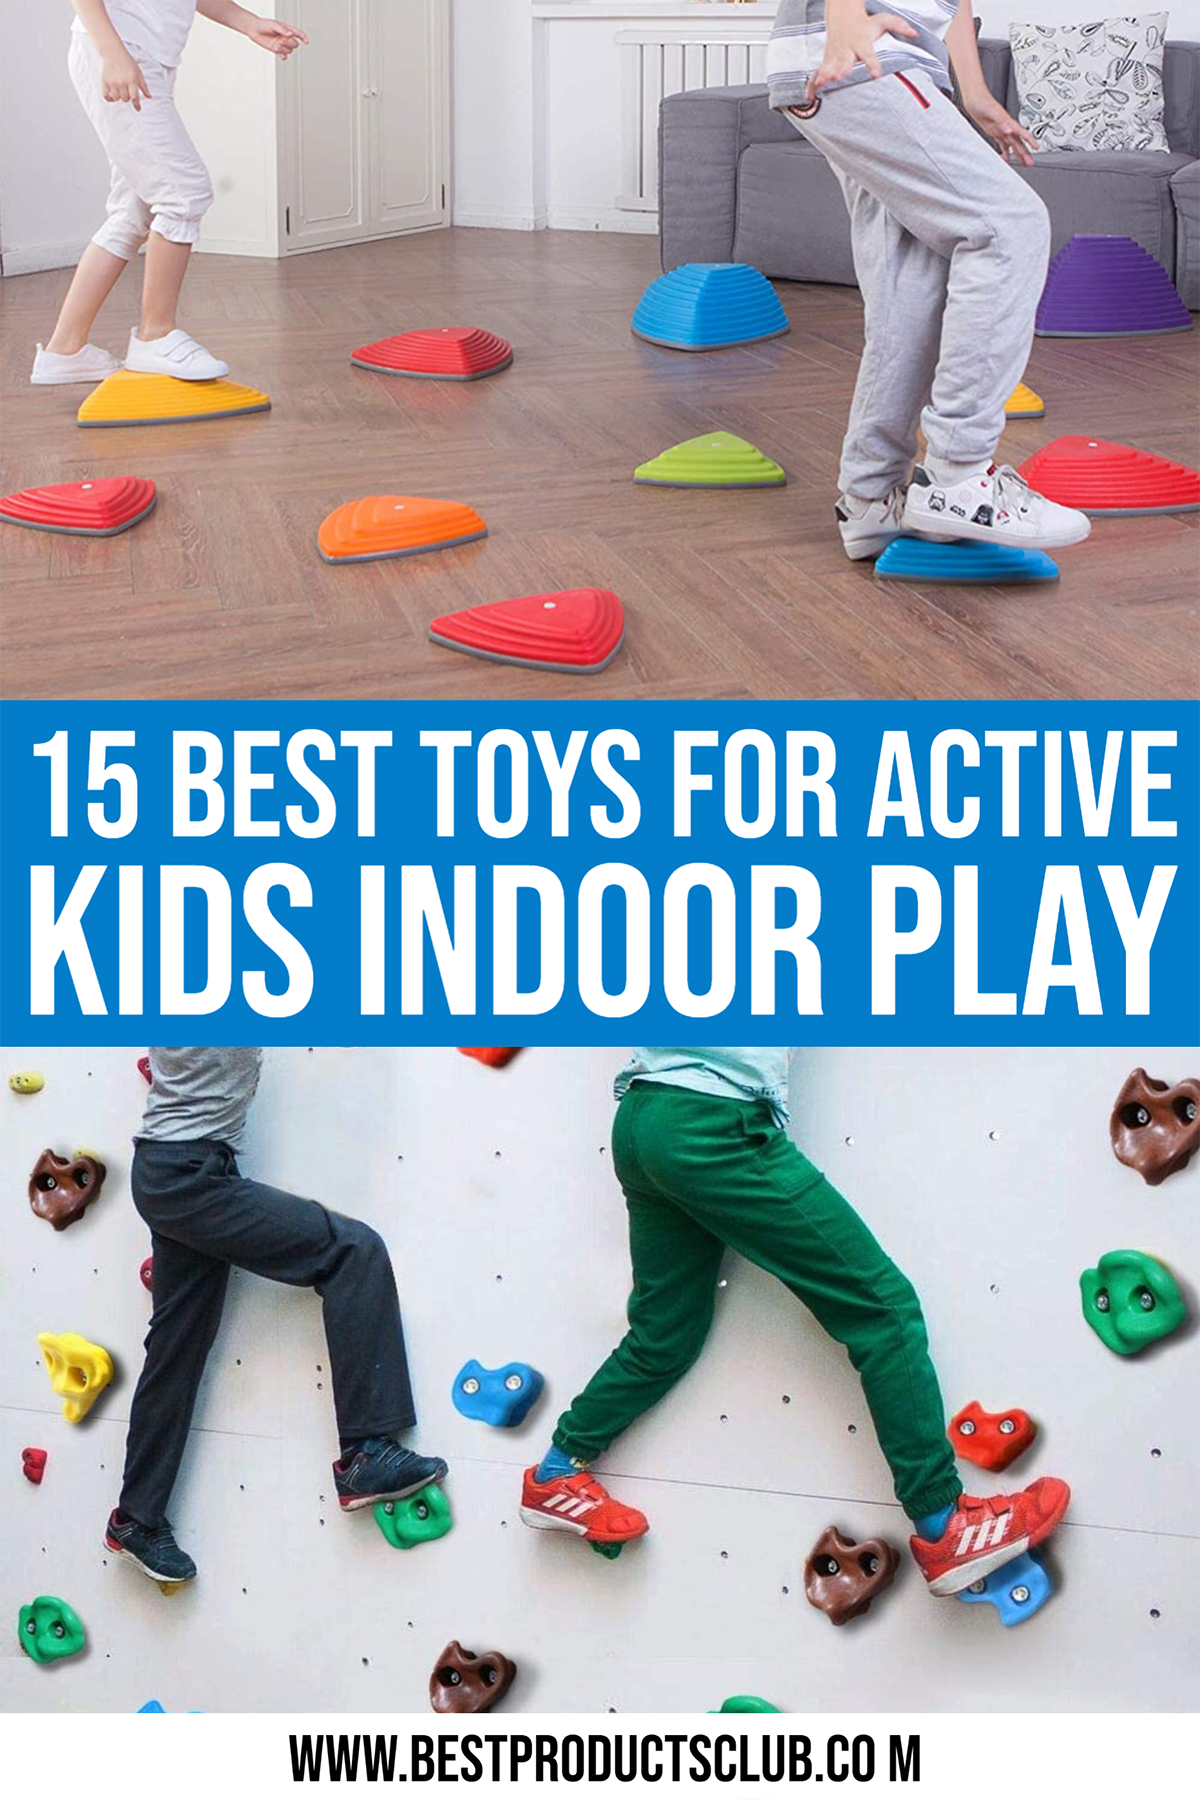 The Best Indoor Toys and Games for Active Play